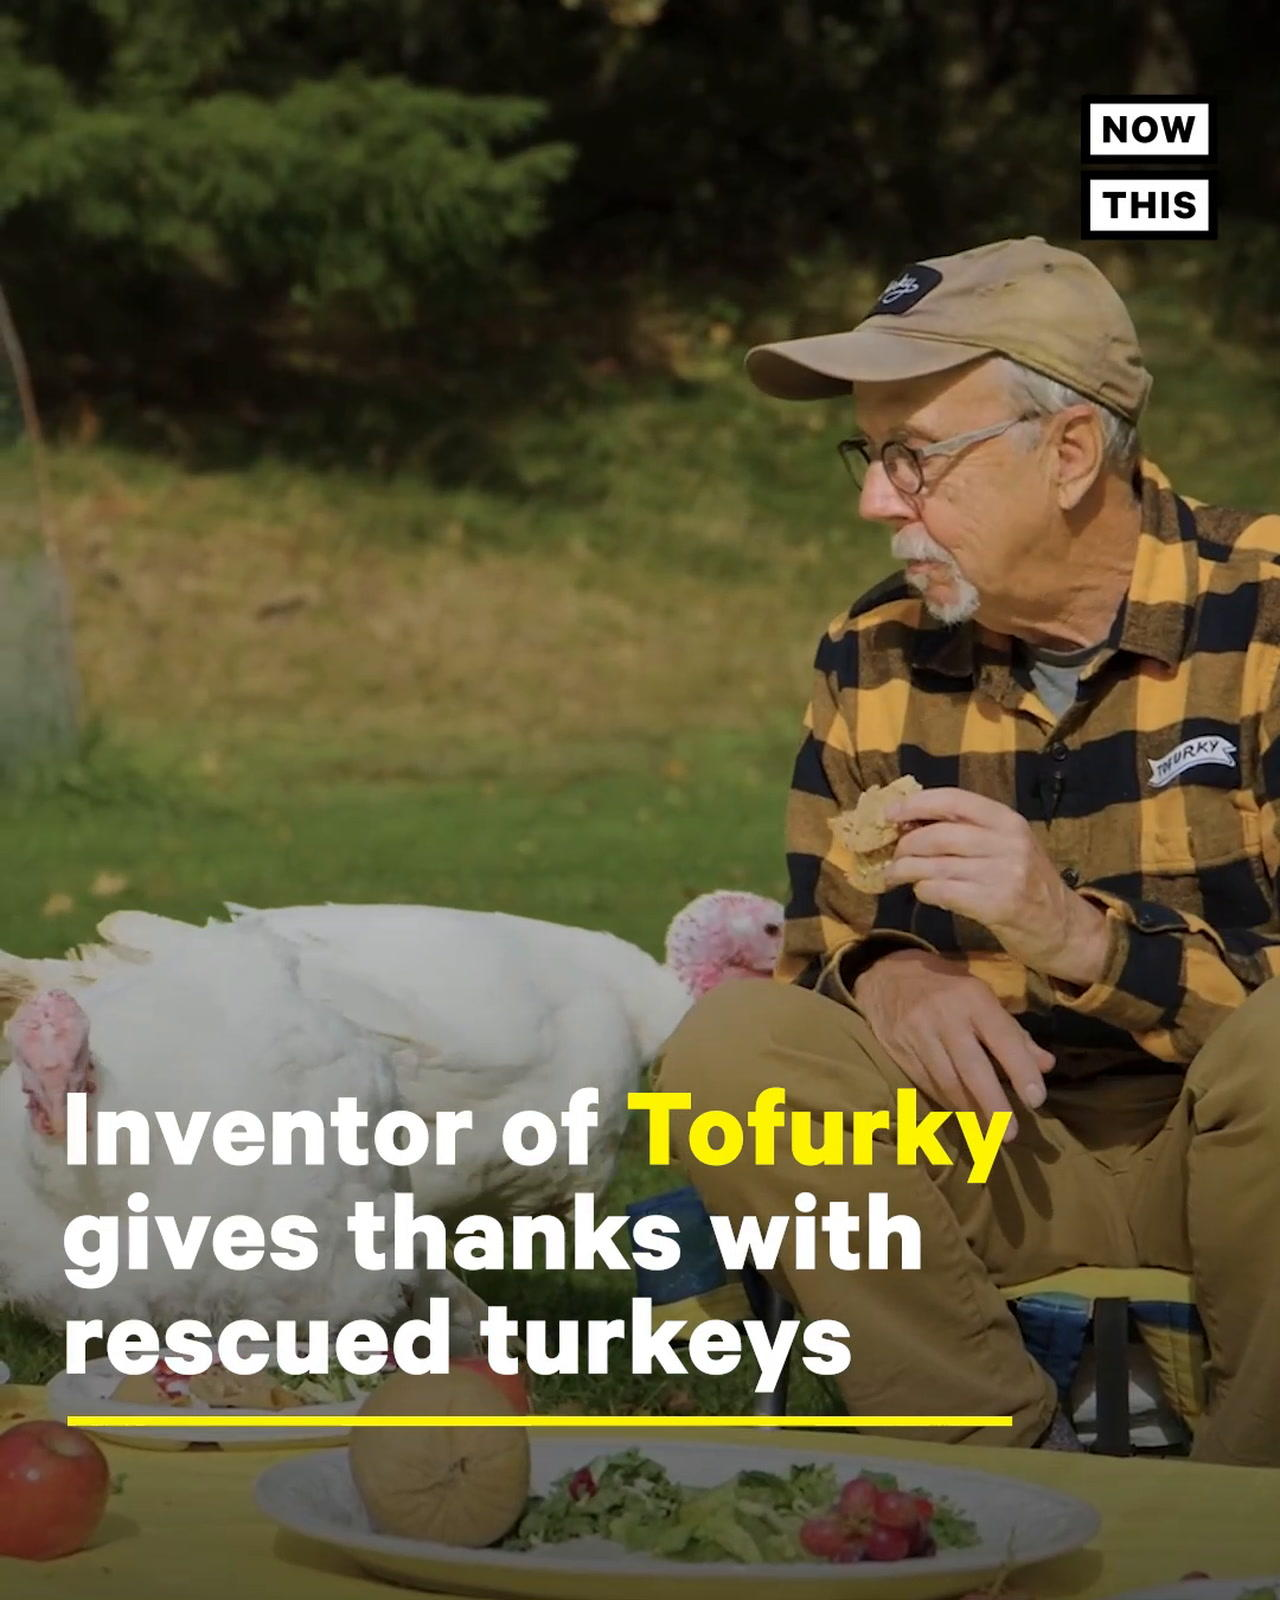 Tofurky Founder Reflects on Vegetarian Thanksgivings